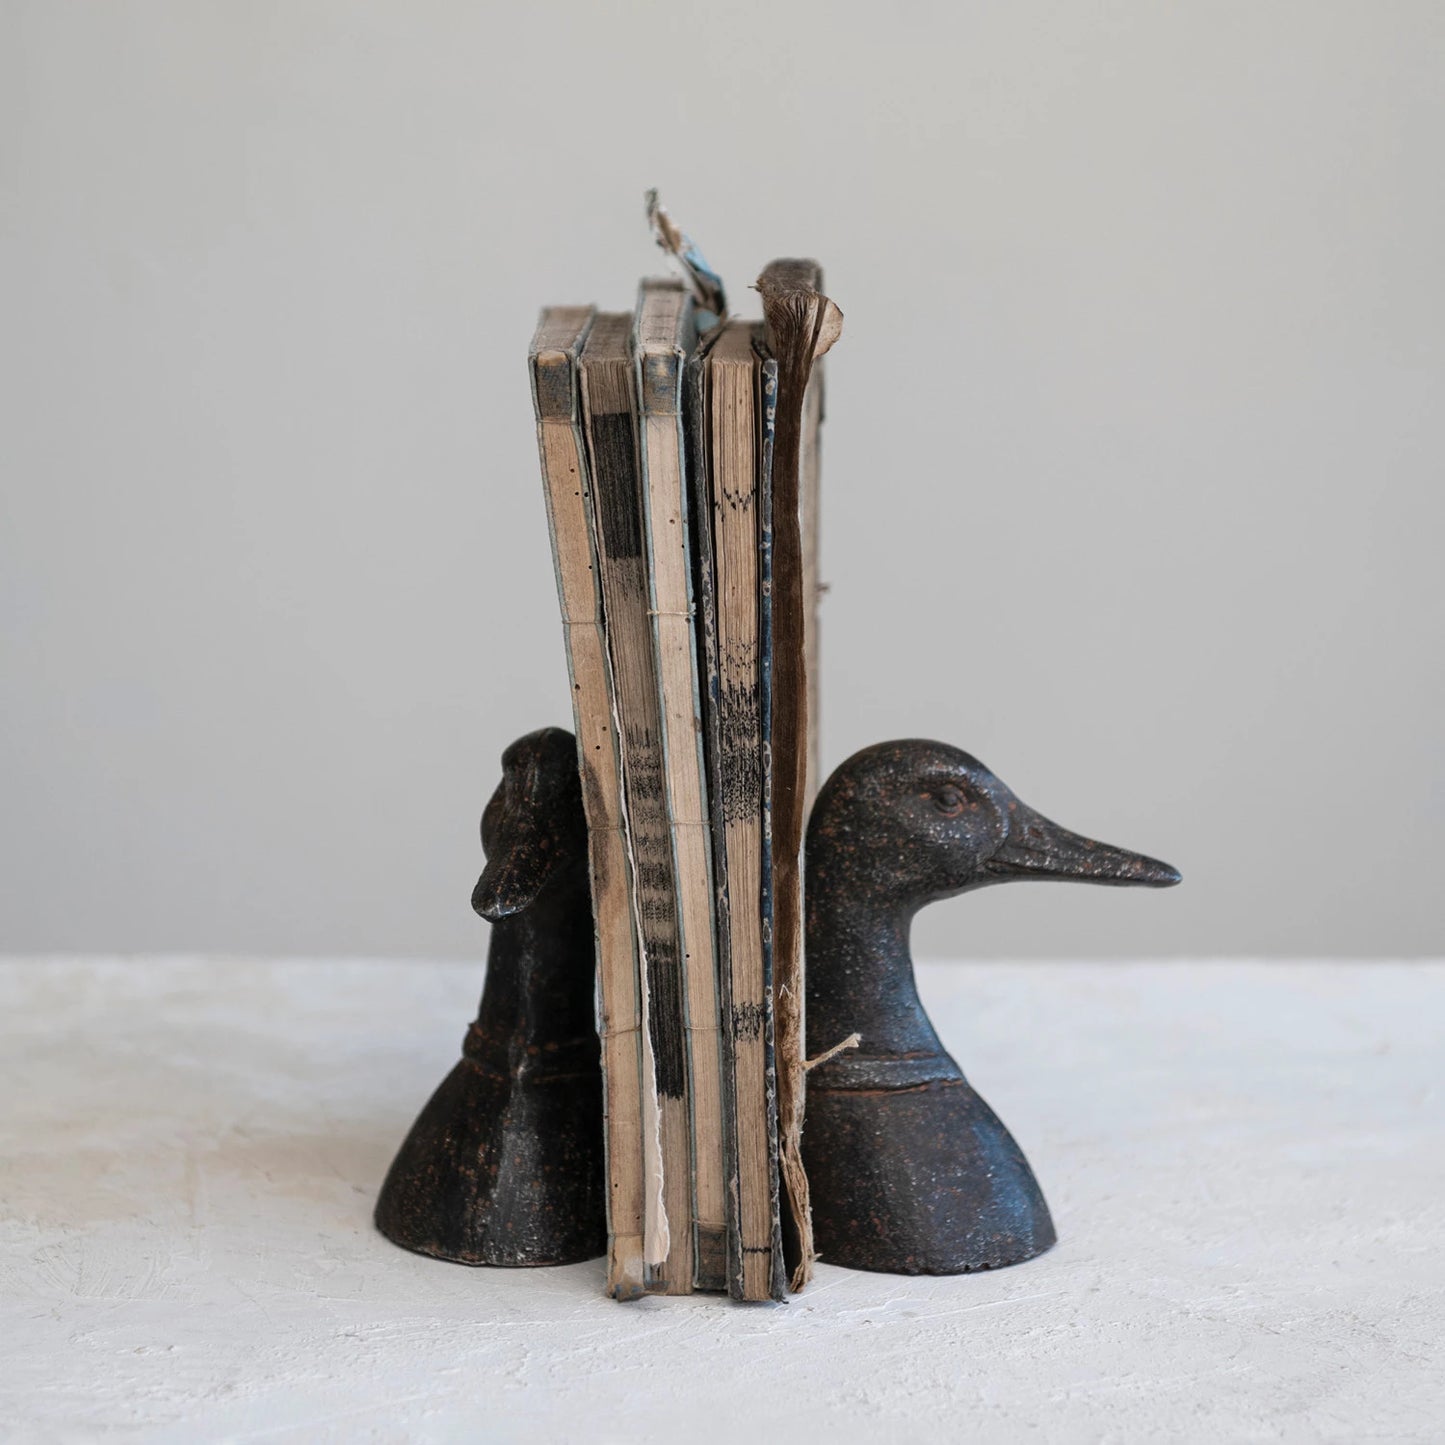 Duckhead Bookends, The Feathered Farmhouse